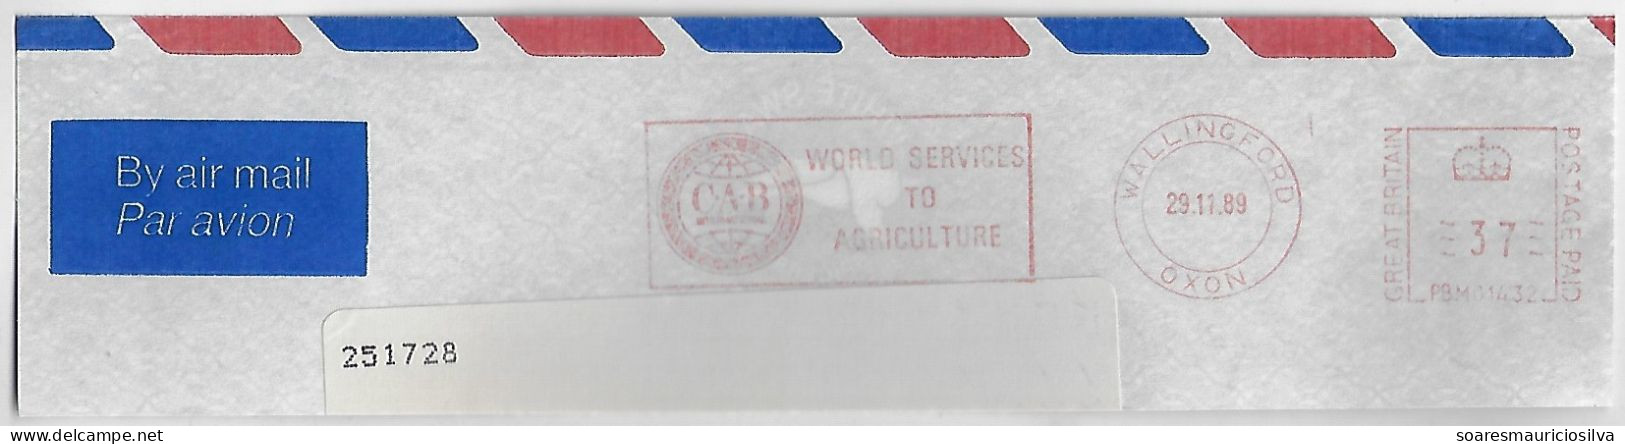 Great Britain 1989 Meter Stamp Pitney Bowes 5000 Slogan CAB International World Services To Agriculture Wallingford - Storia Postale